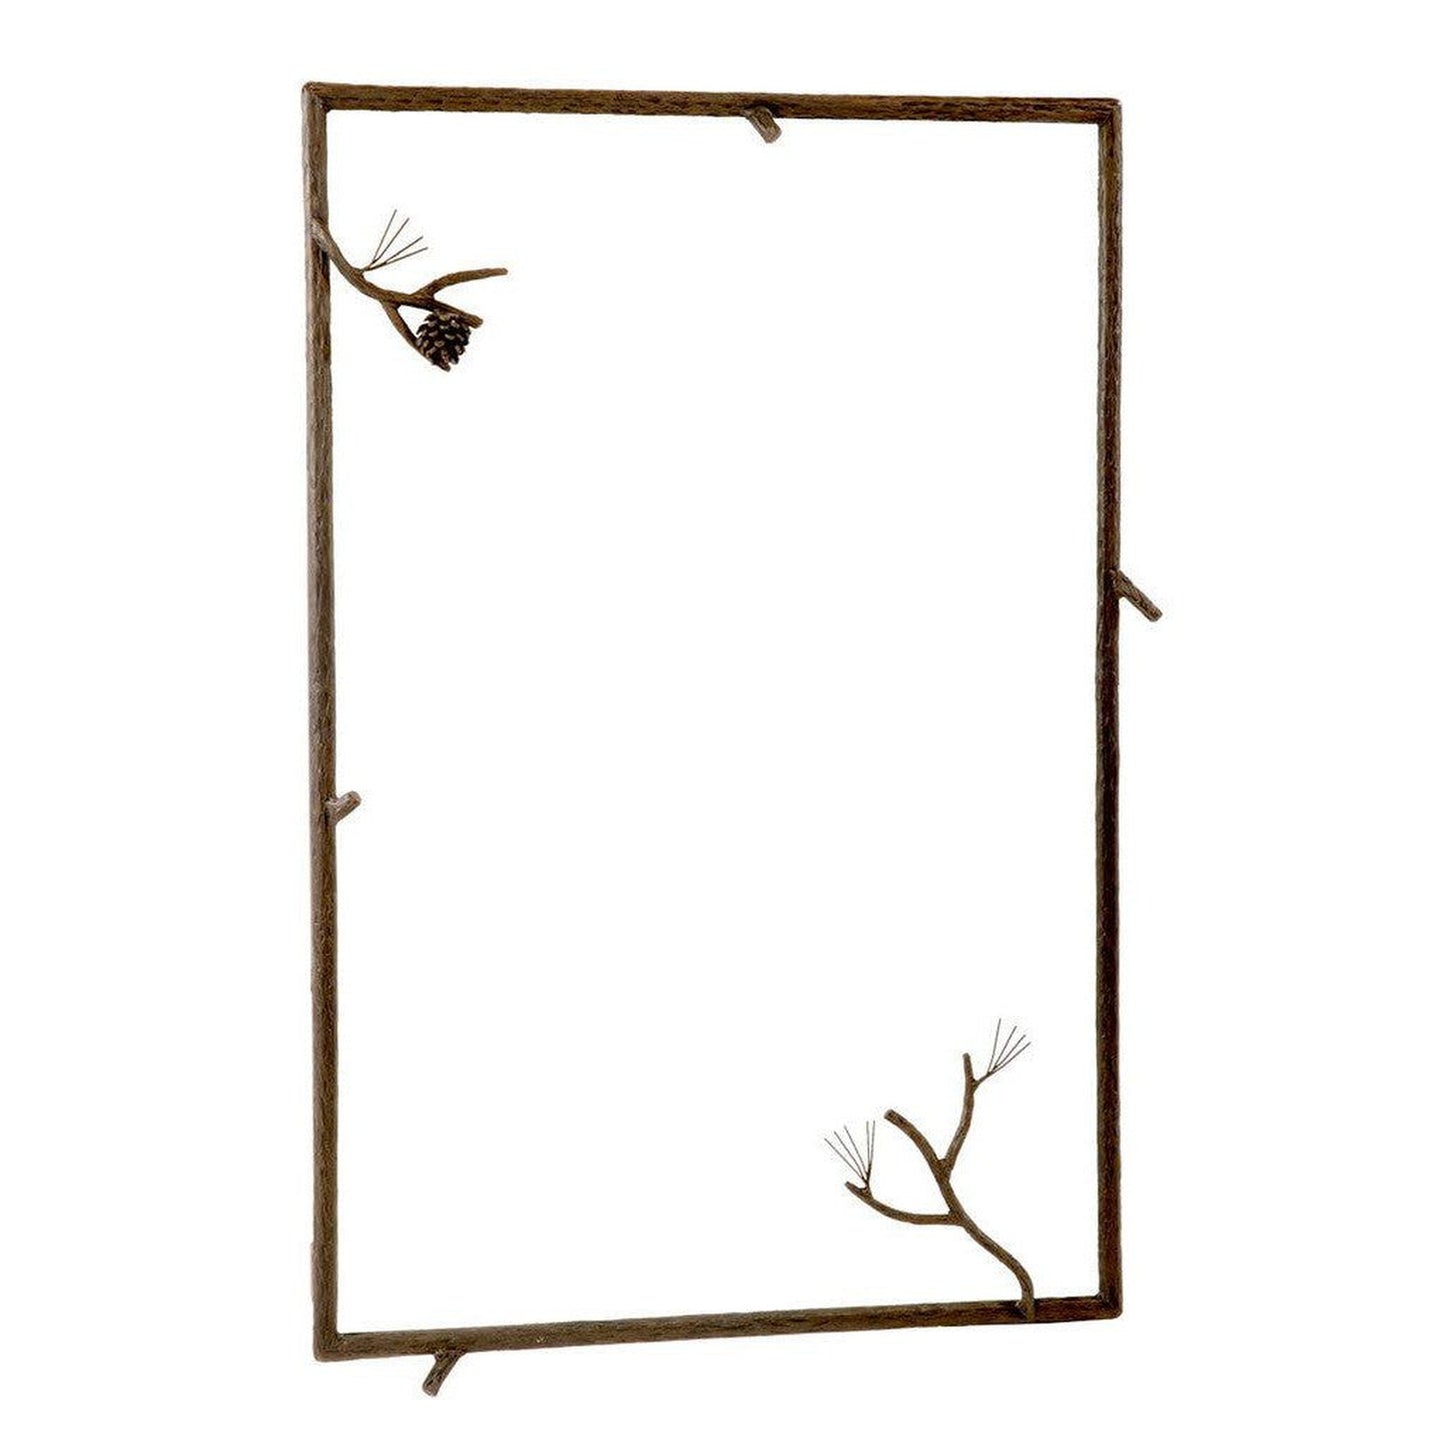 Stone County Ironworks Pine 25" x 21" Small Satin Black Iron Wall Mirror With Copper Iron Accent